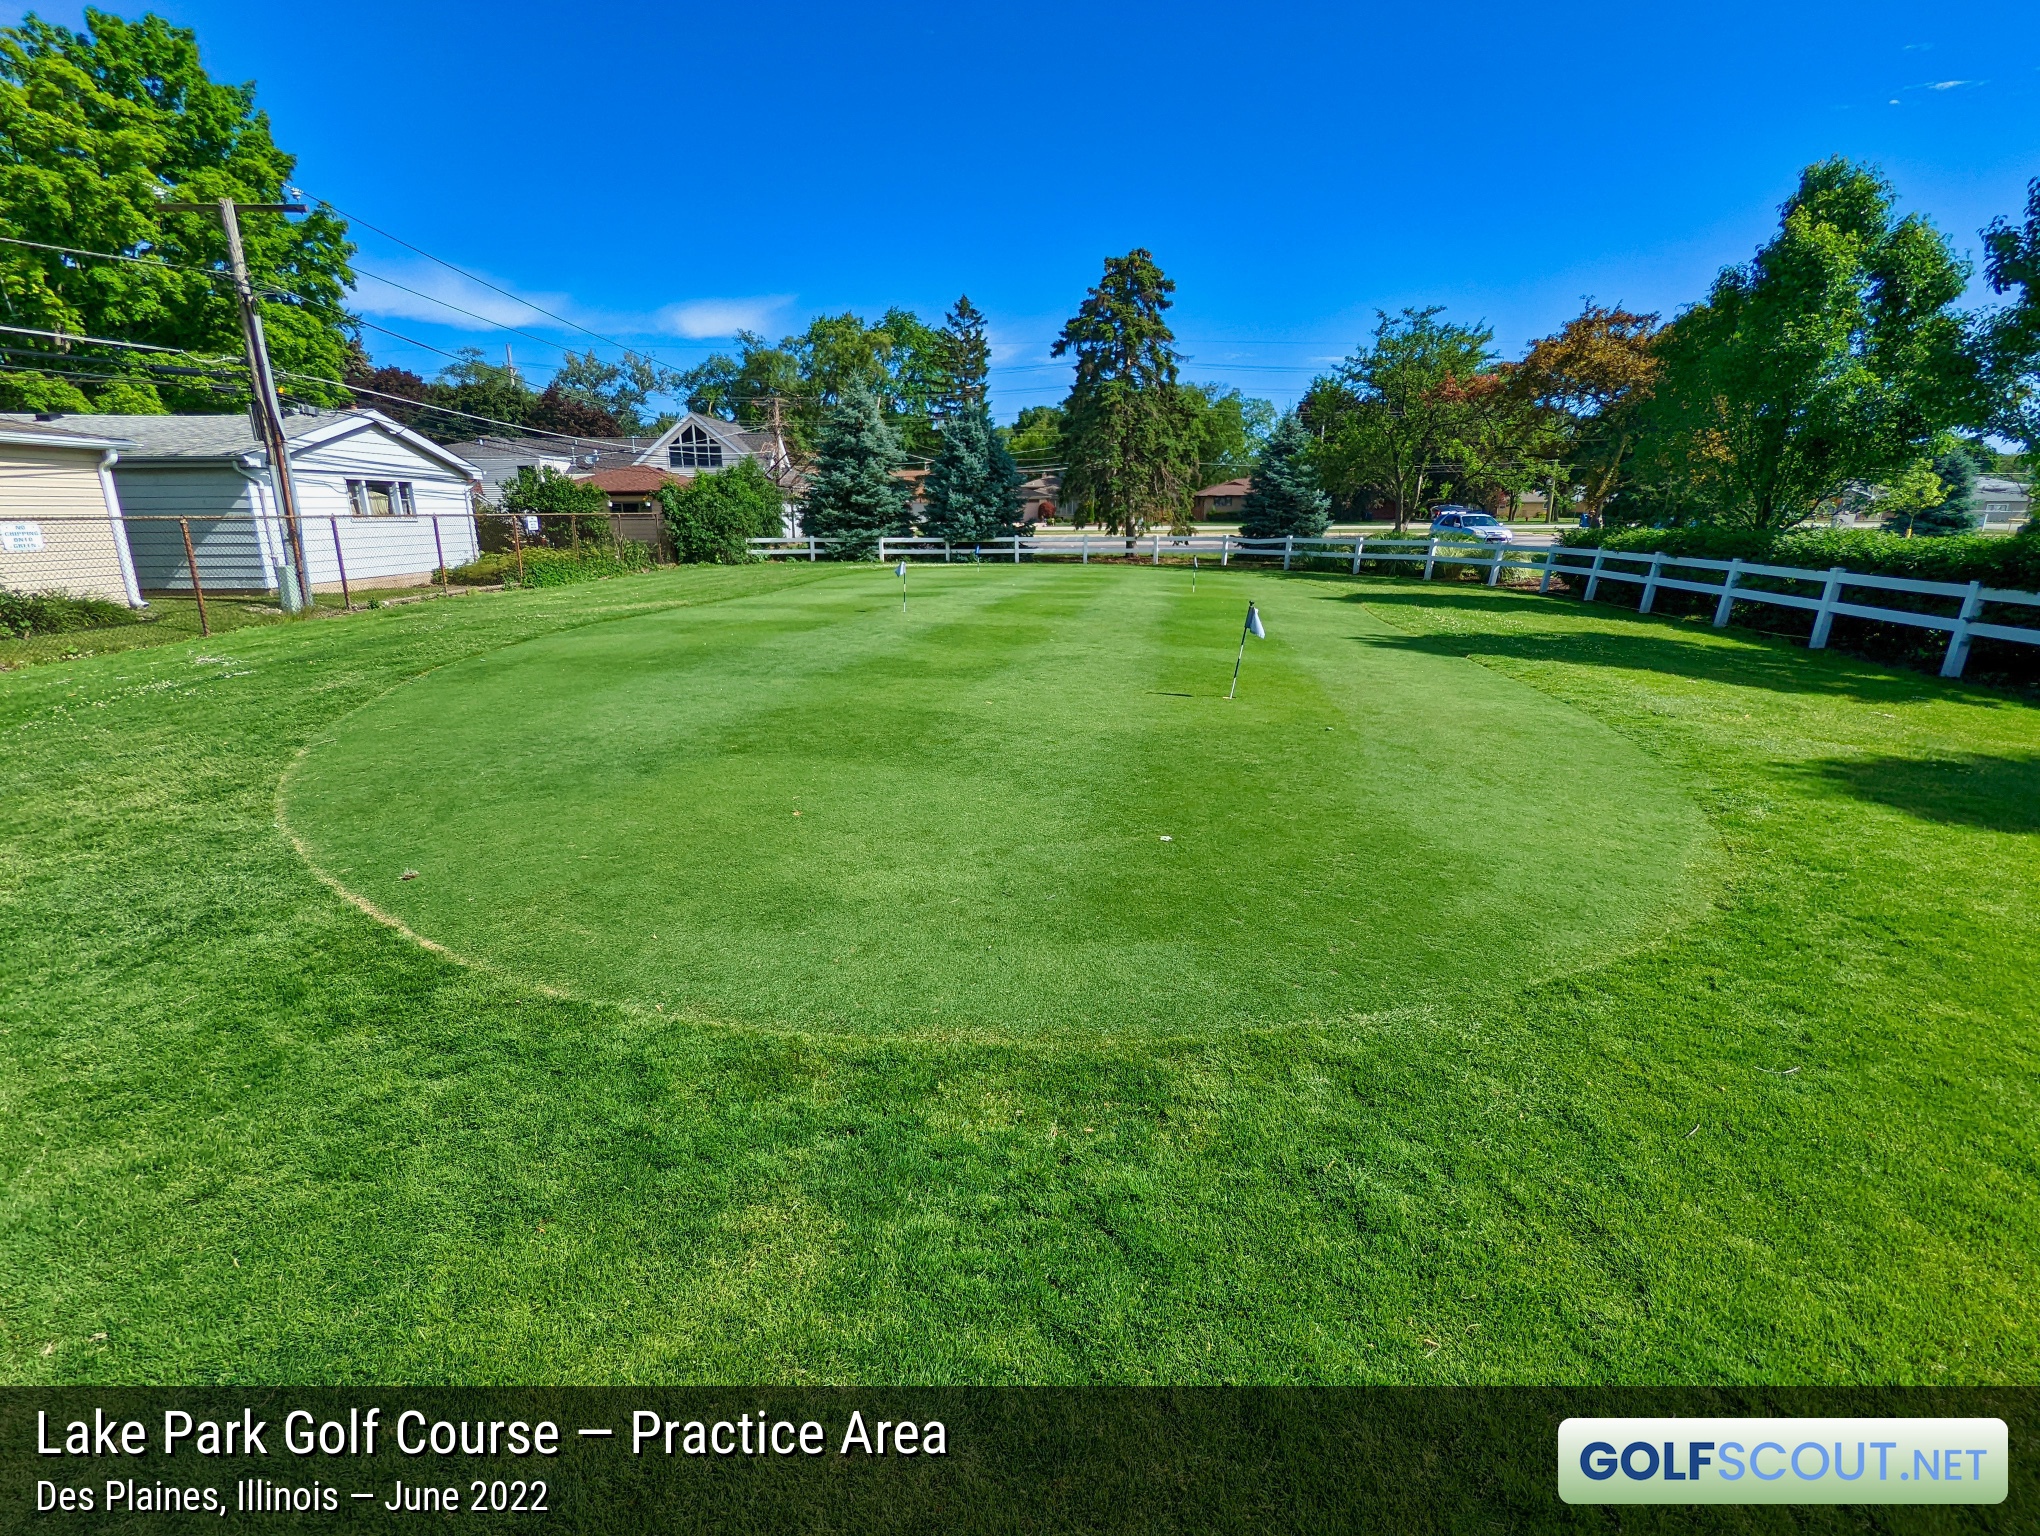 Photo of the practice area at Lake Park Golf Course in Des Plaines, Illinois. 